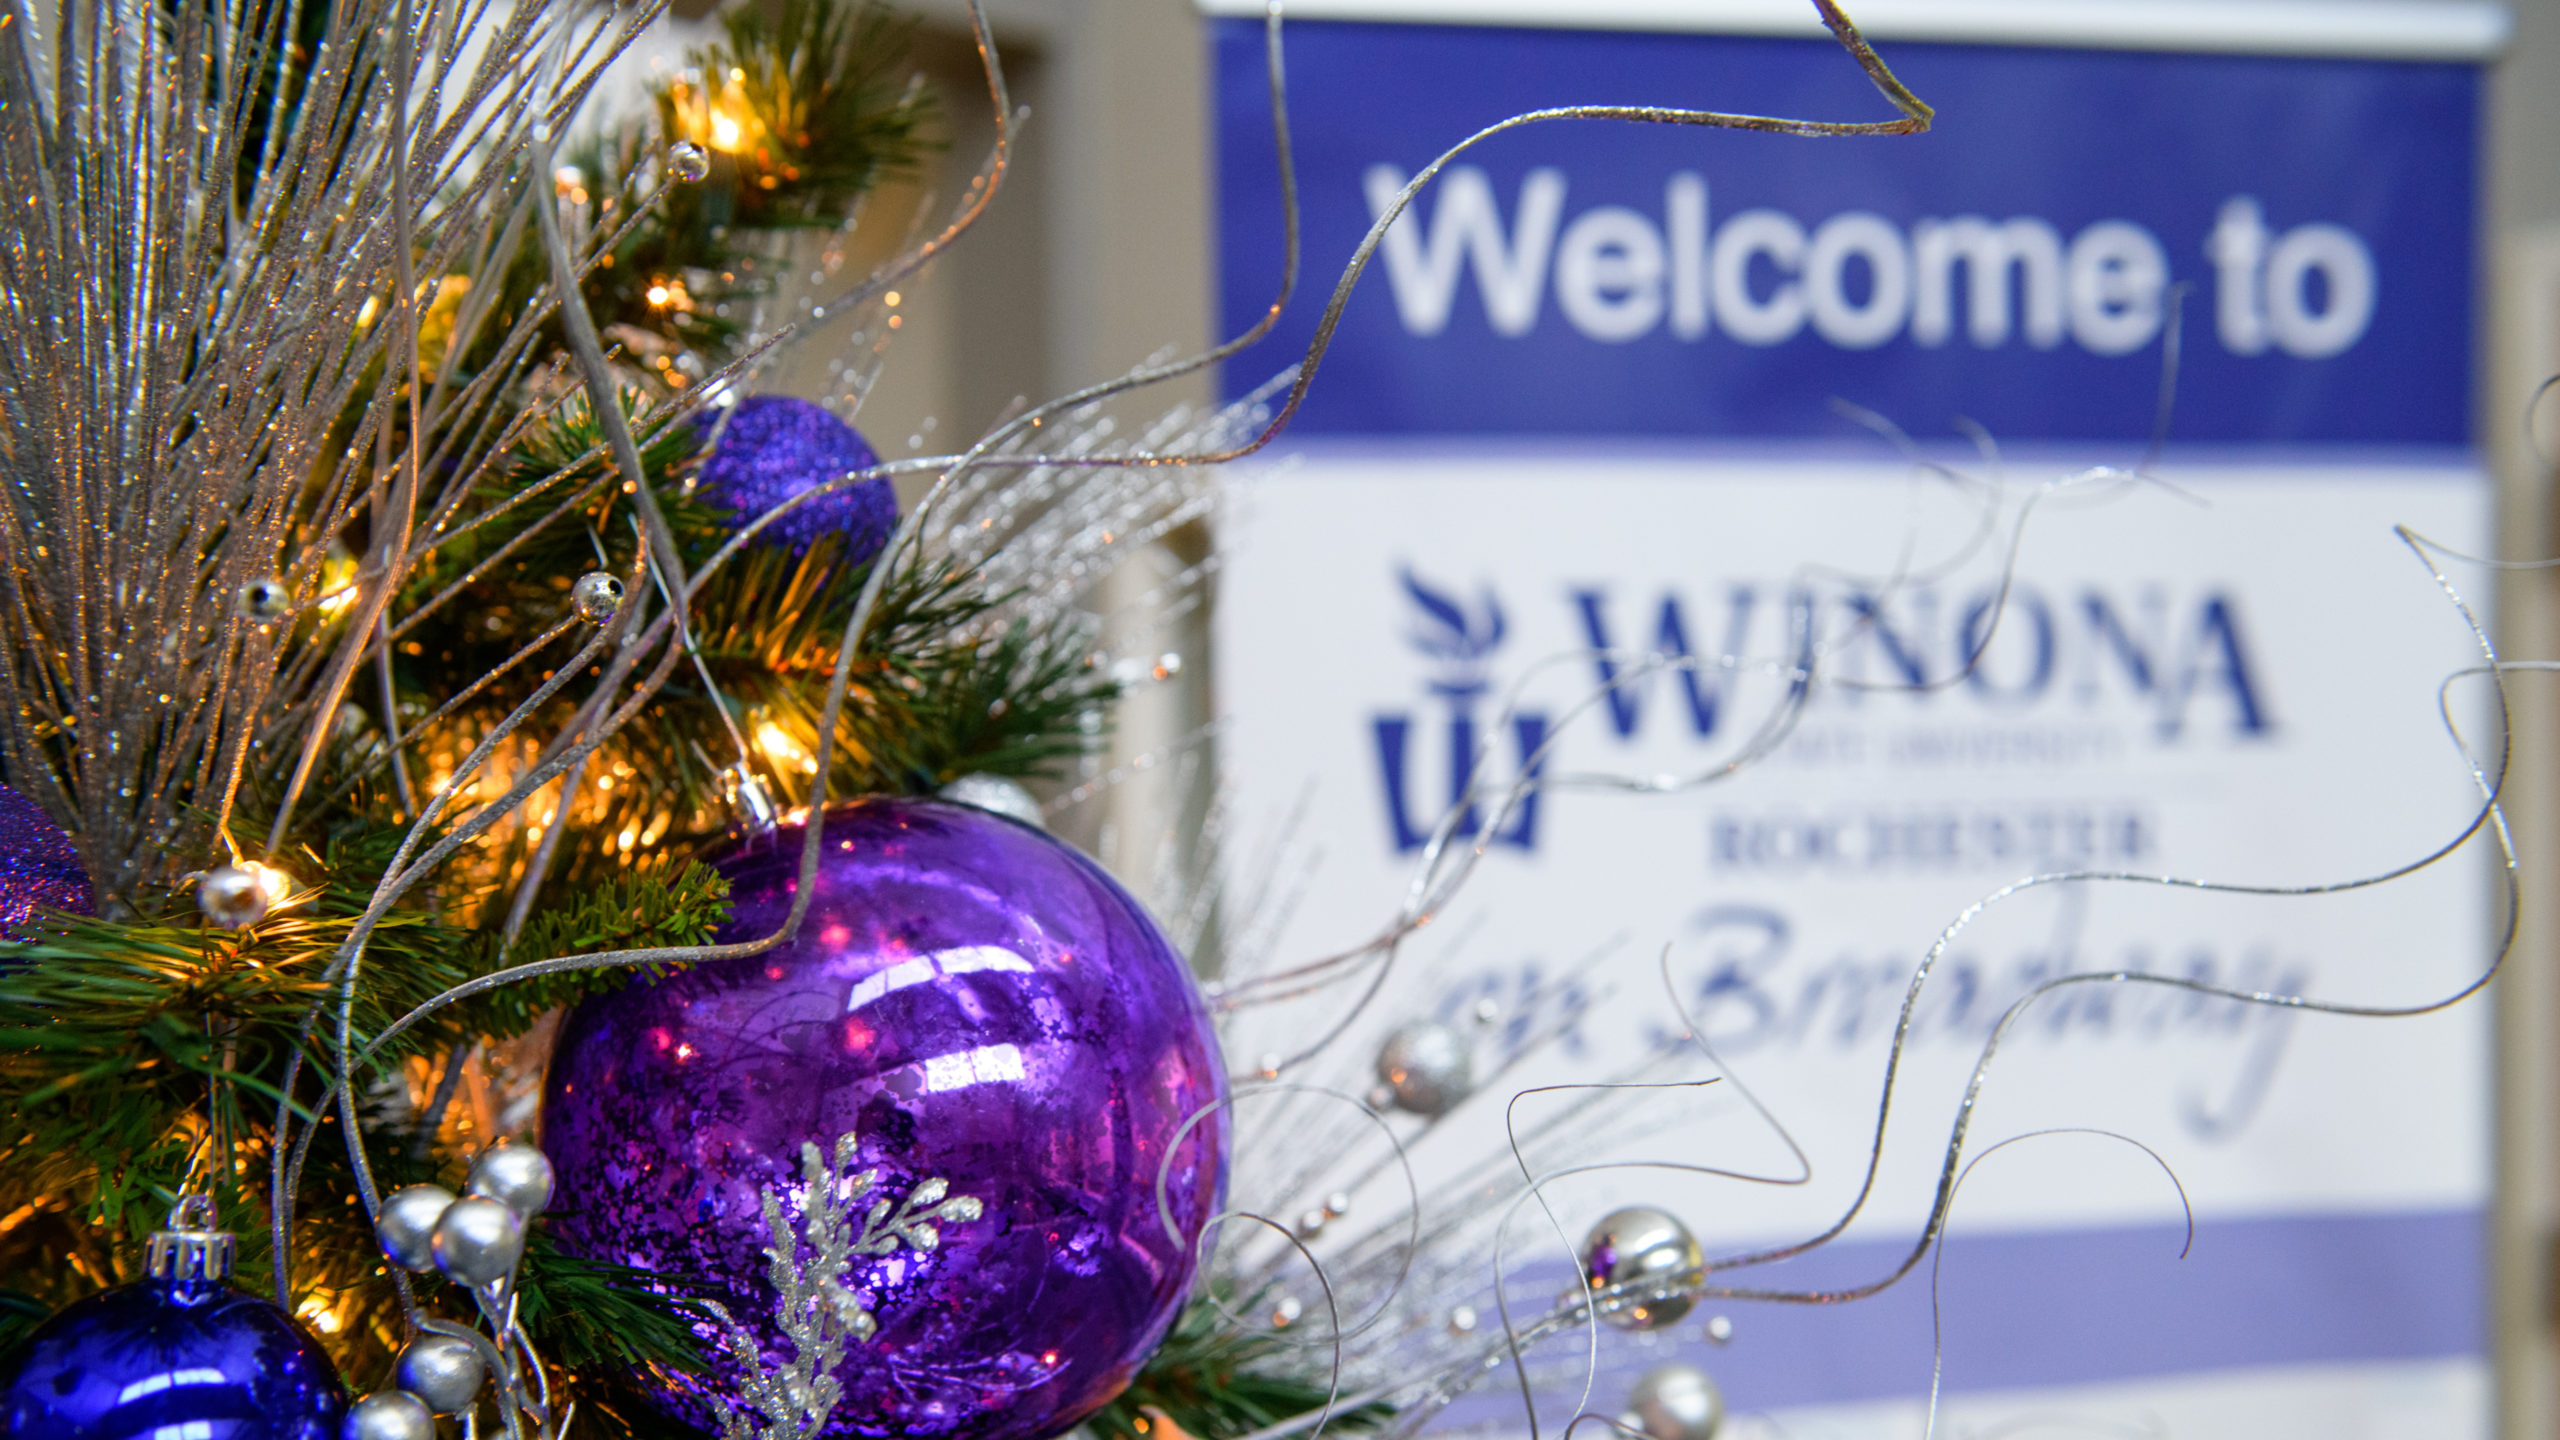 The "Painting the Town Purple" holiday tree is on display at the WSU-Rochester on Broadway campus suite as part of the Festival of Trees